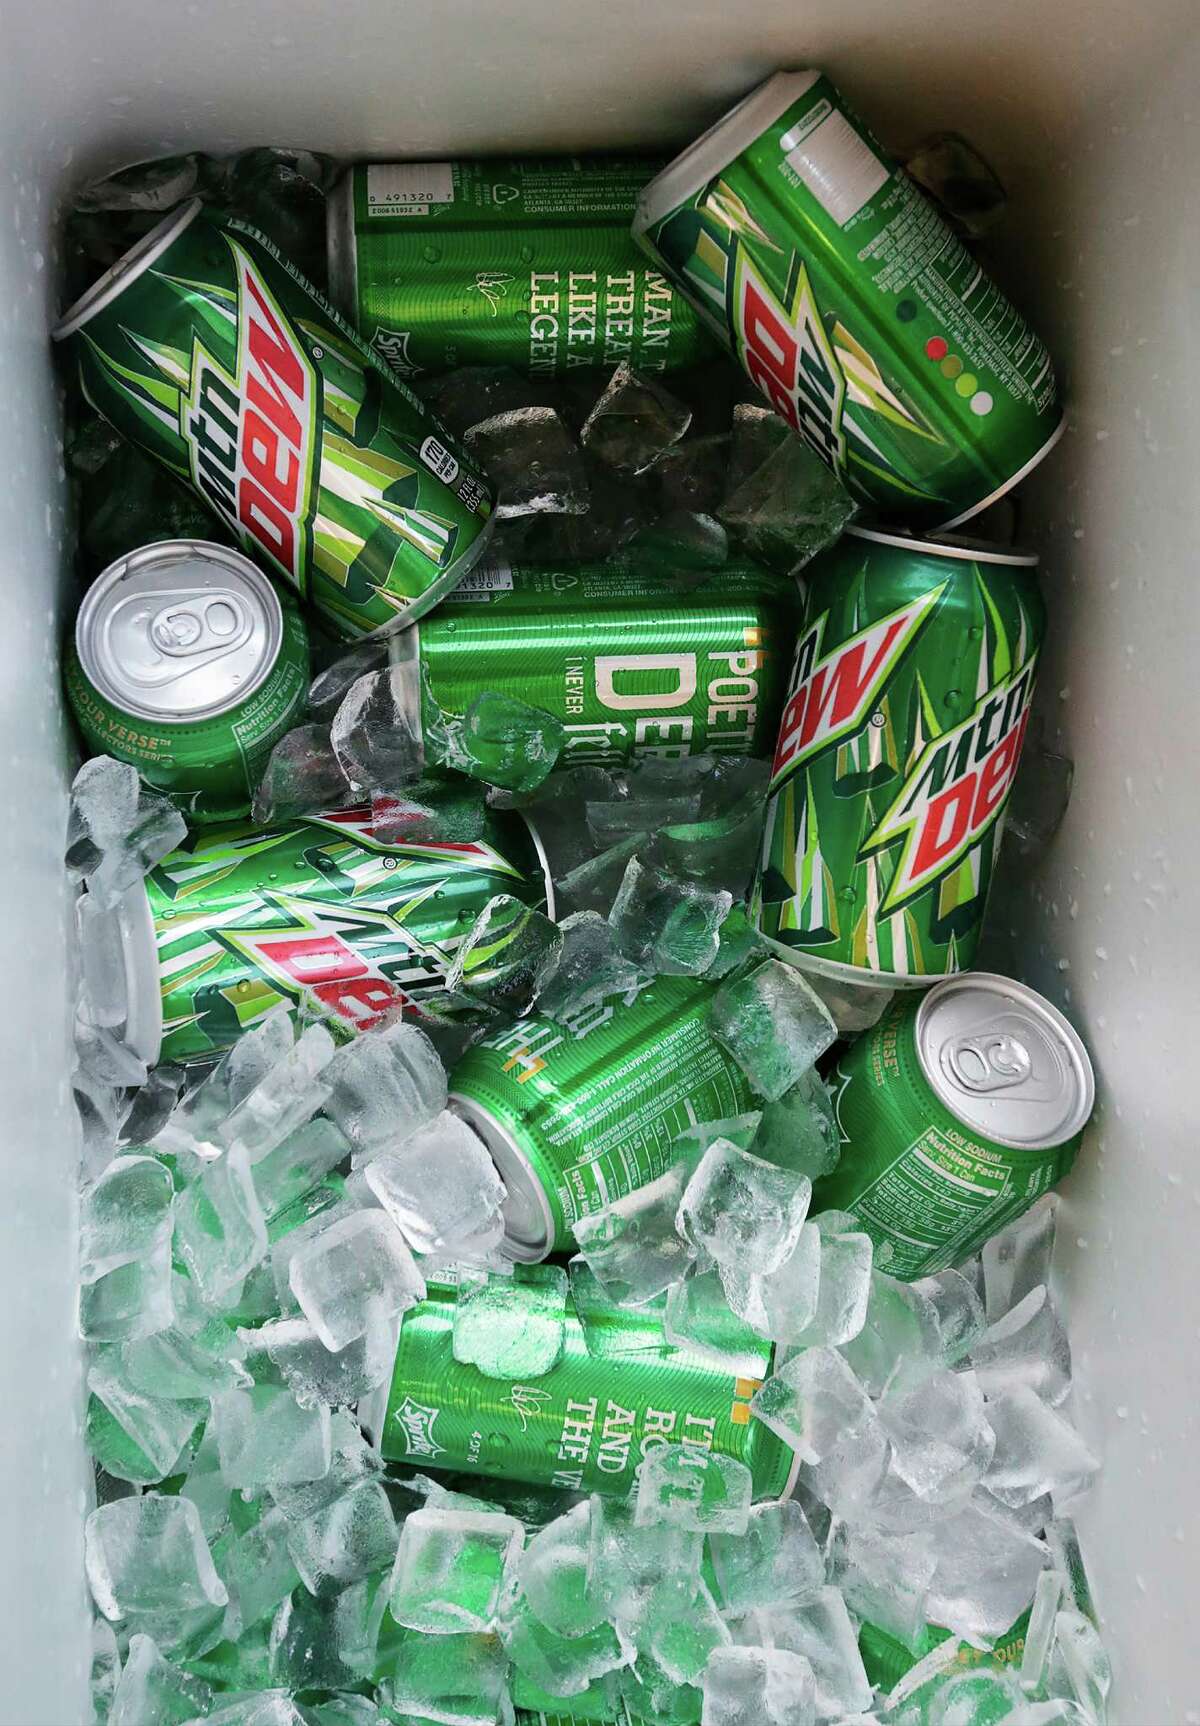 An ice chest filled with soda will help keep the SoHacks participants going through the night. The hackathon attracted more than 200 middle and high school students.